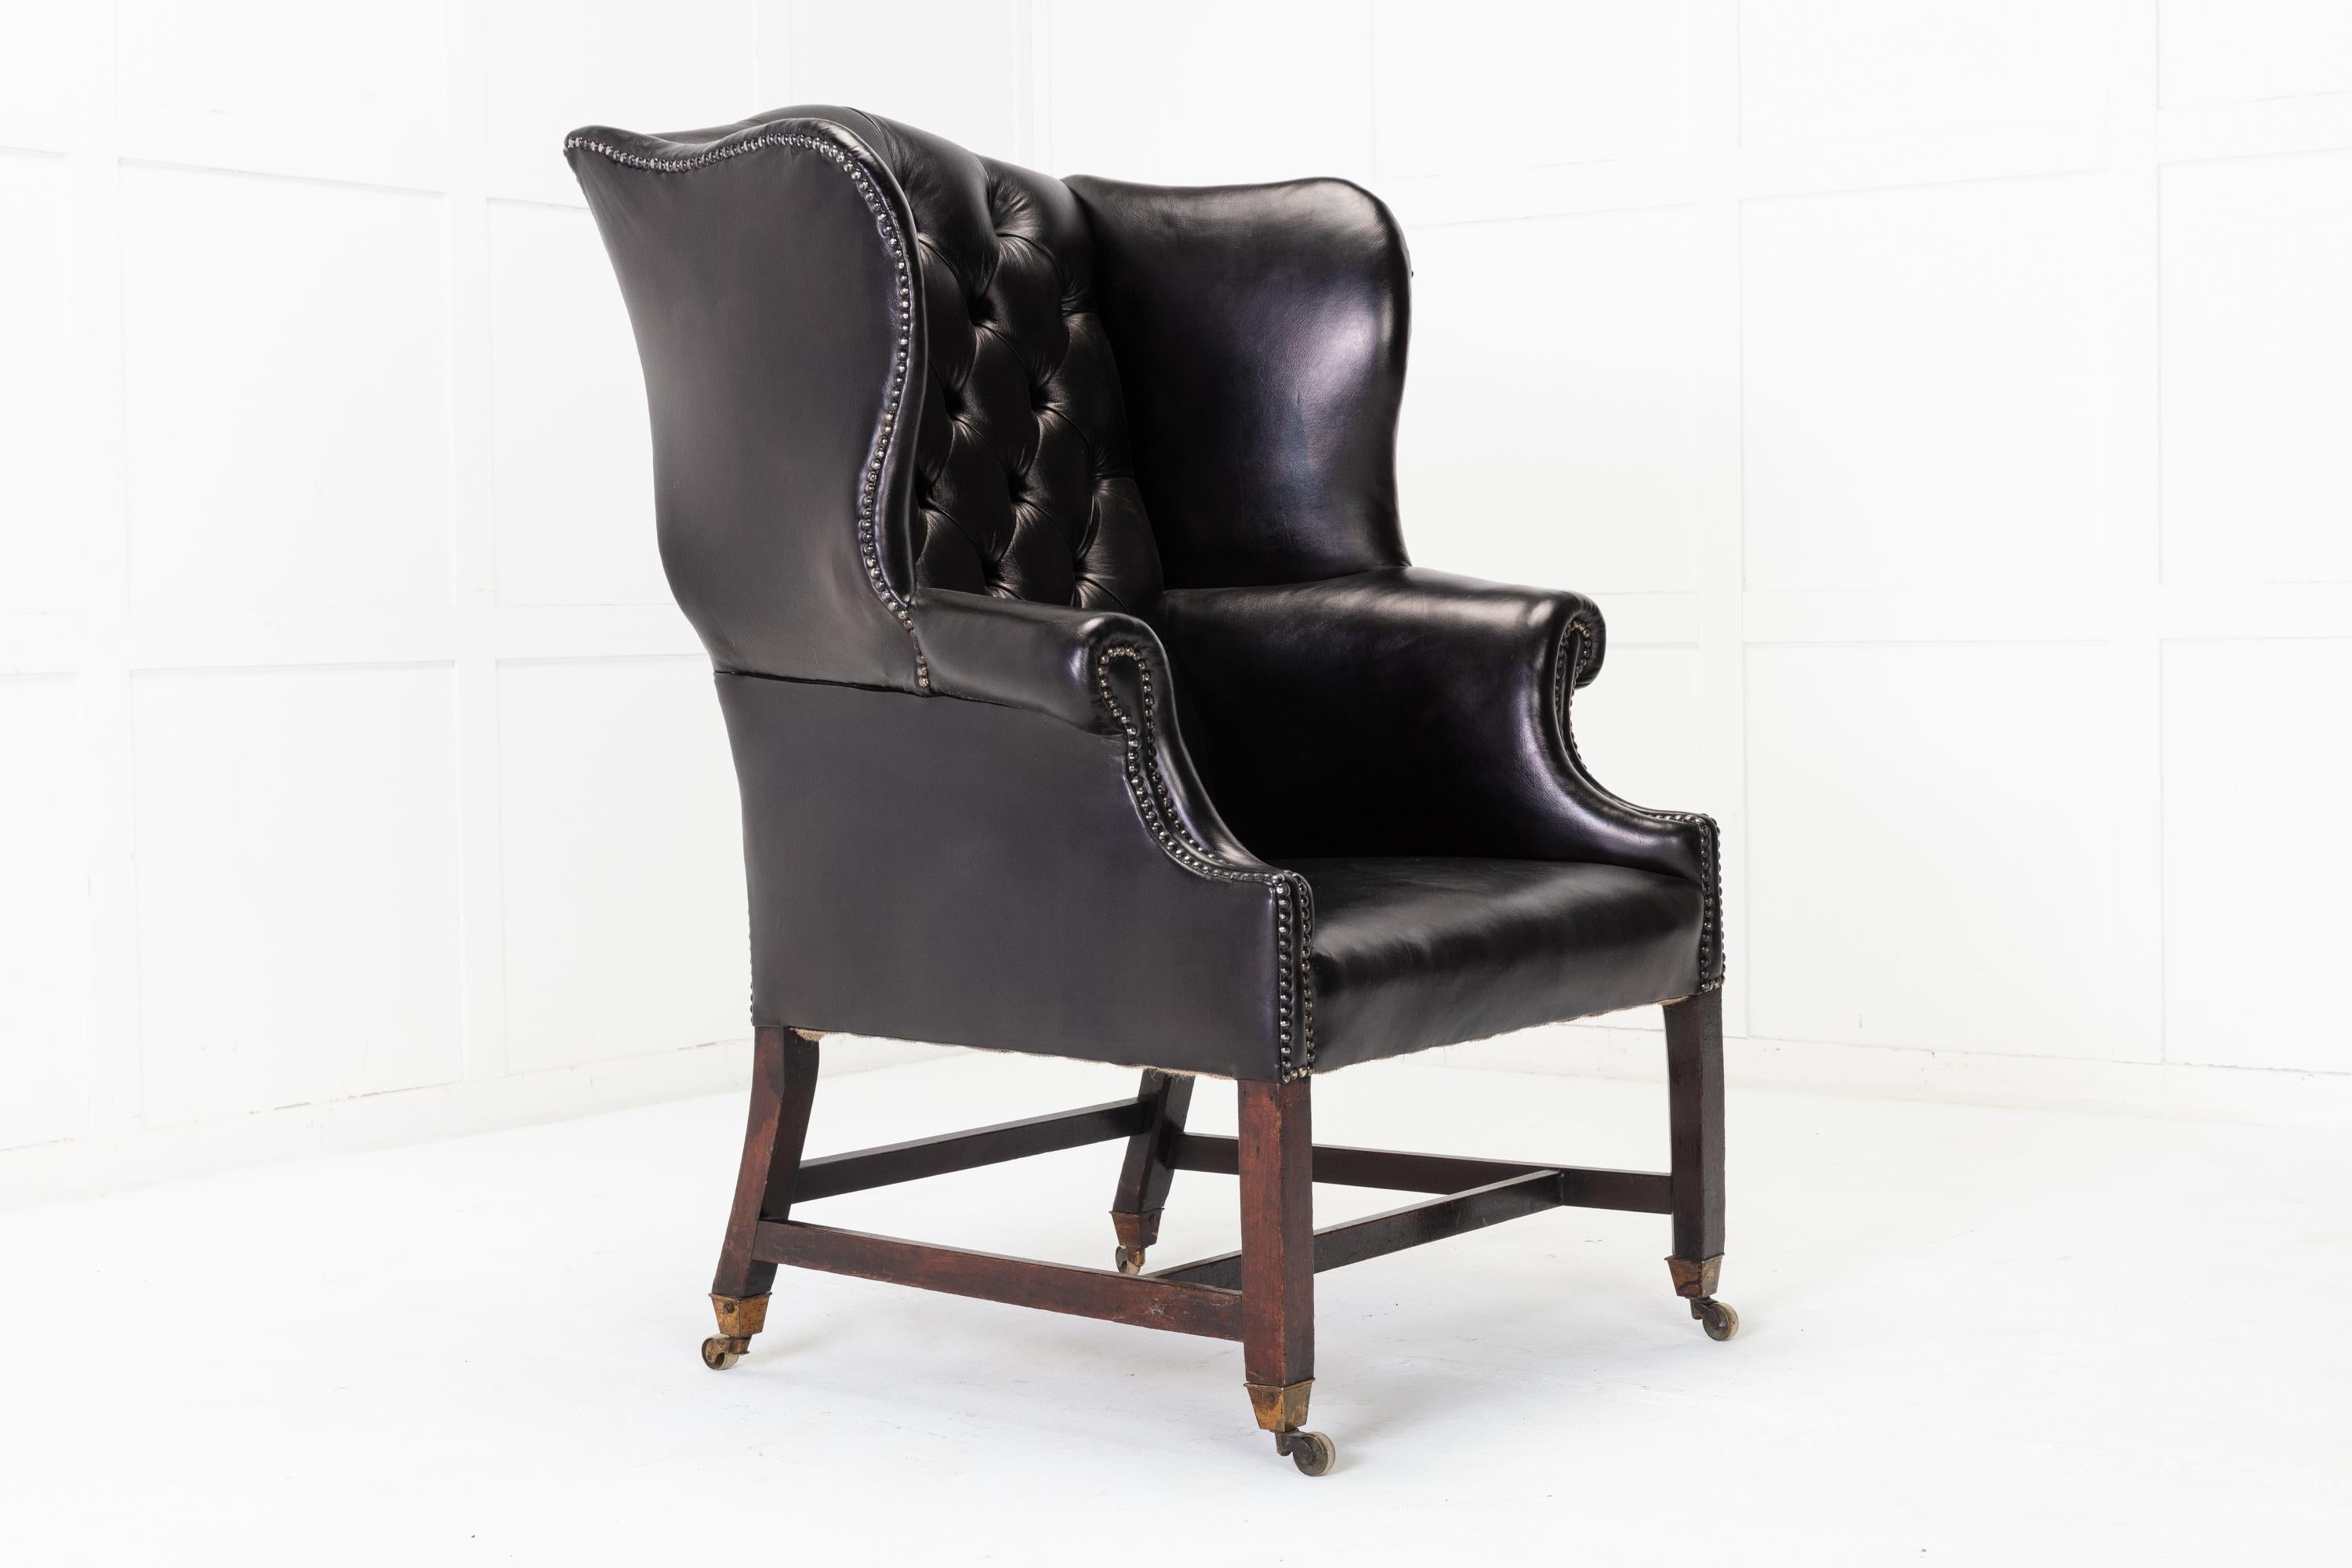 A good sized, shapely and well proportioned George III, English 18th century, mahogany wing chair.

Upholstered in black leather having a tall buttoned back and generous rolled arms and studded detail. Supported on mahogany legs with traditional